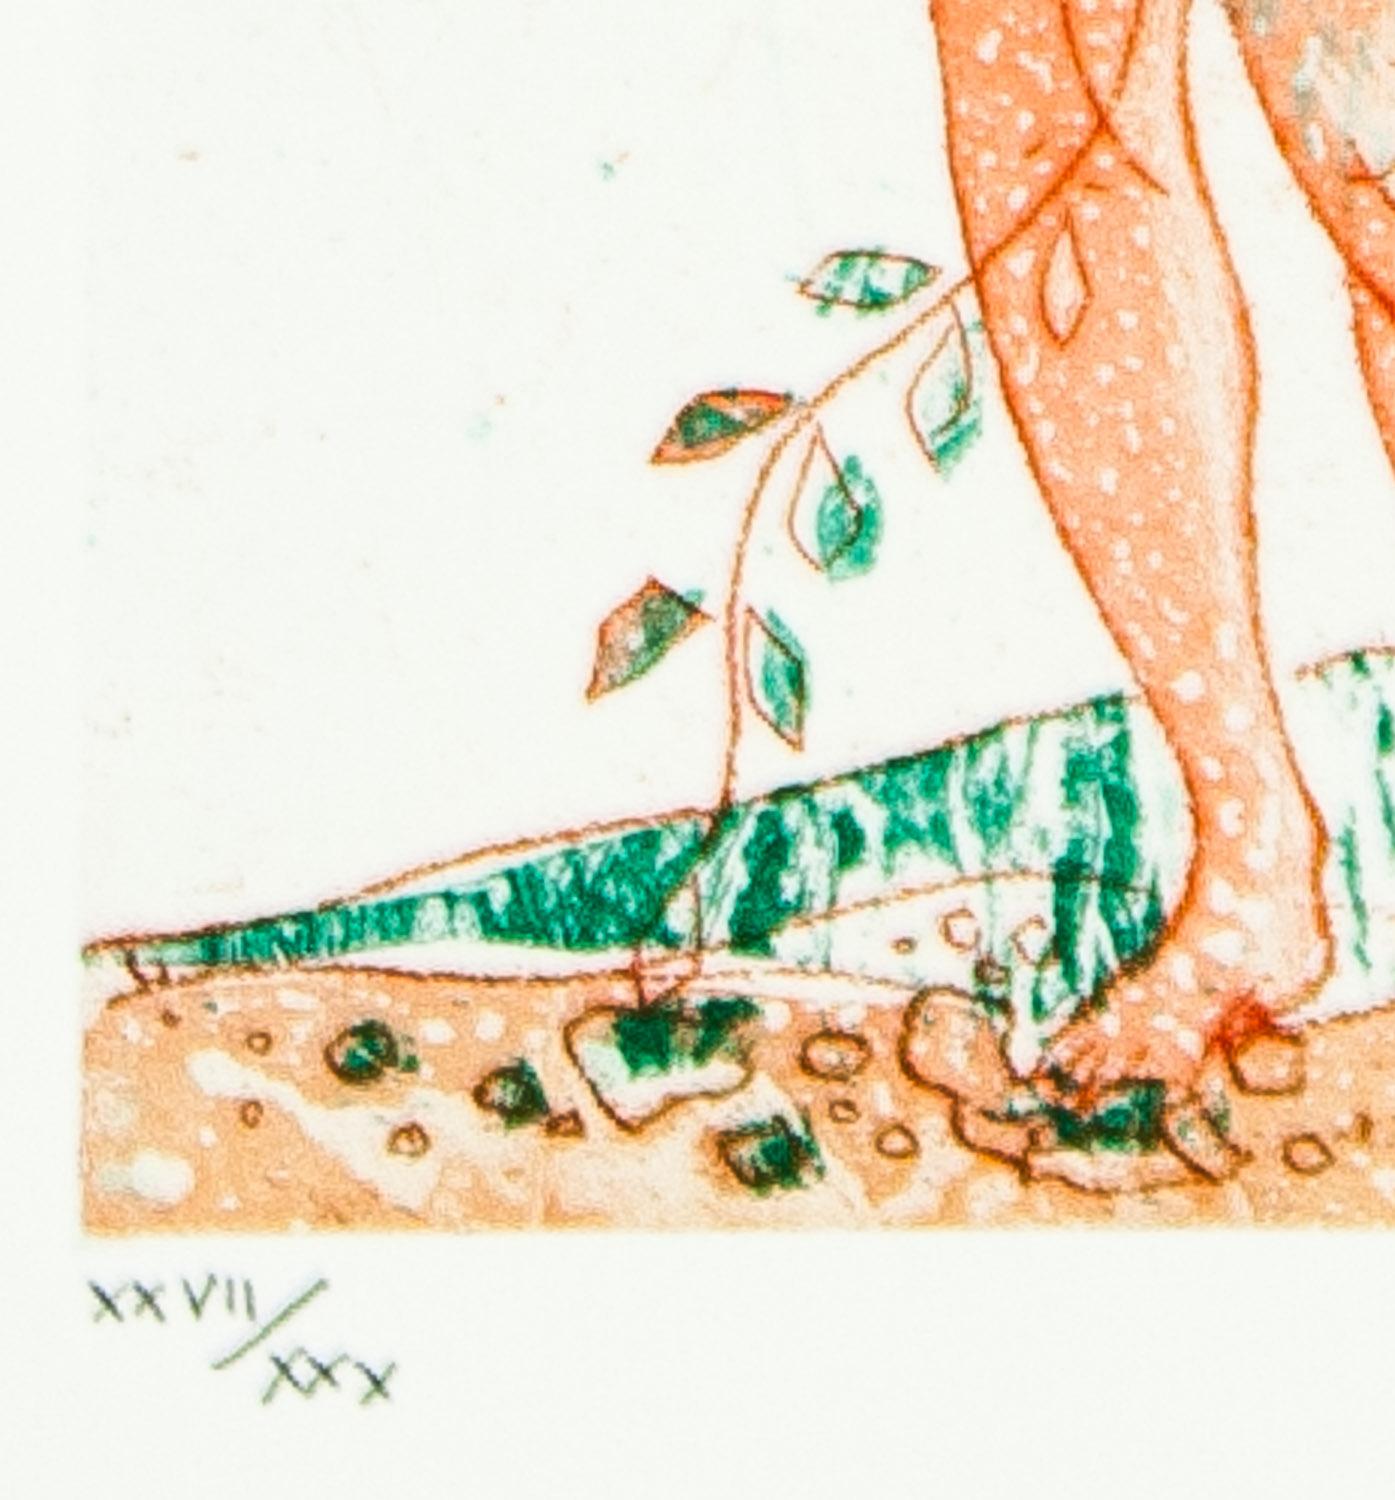    Leaves of Love-Orange Lady is an original signed limited edition (XXII/ XXX) lithograph by Alessandro Nastasio showing a full figured orange colored nude holding flowers in each hand standing with her bare feet on the ground. She appears to have